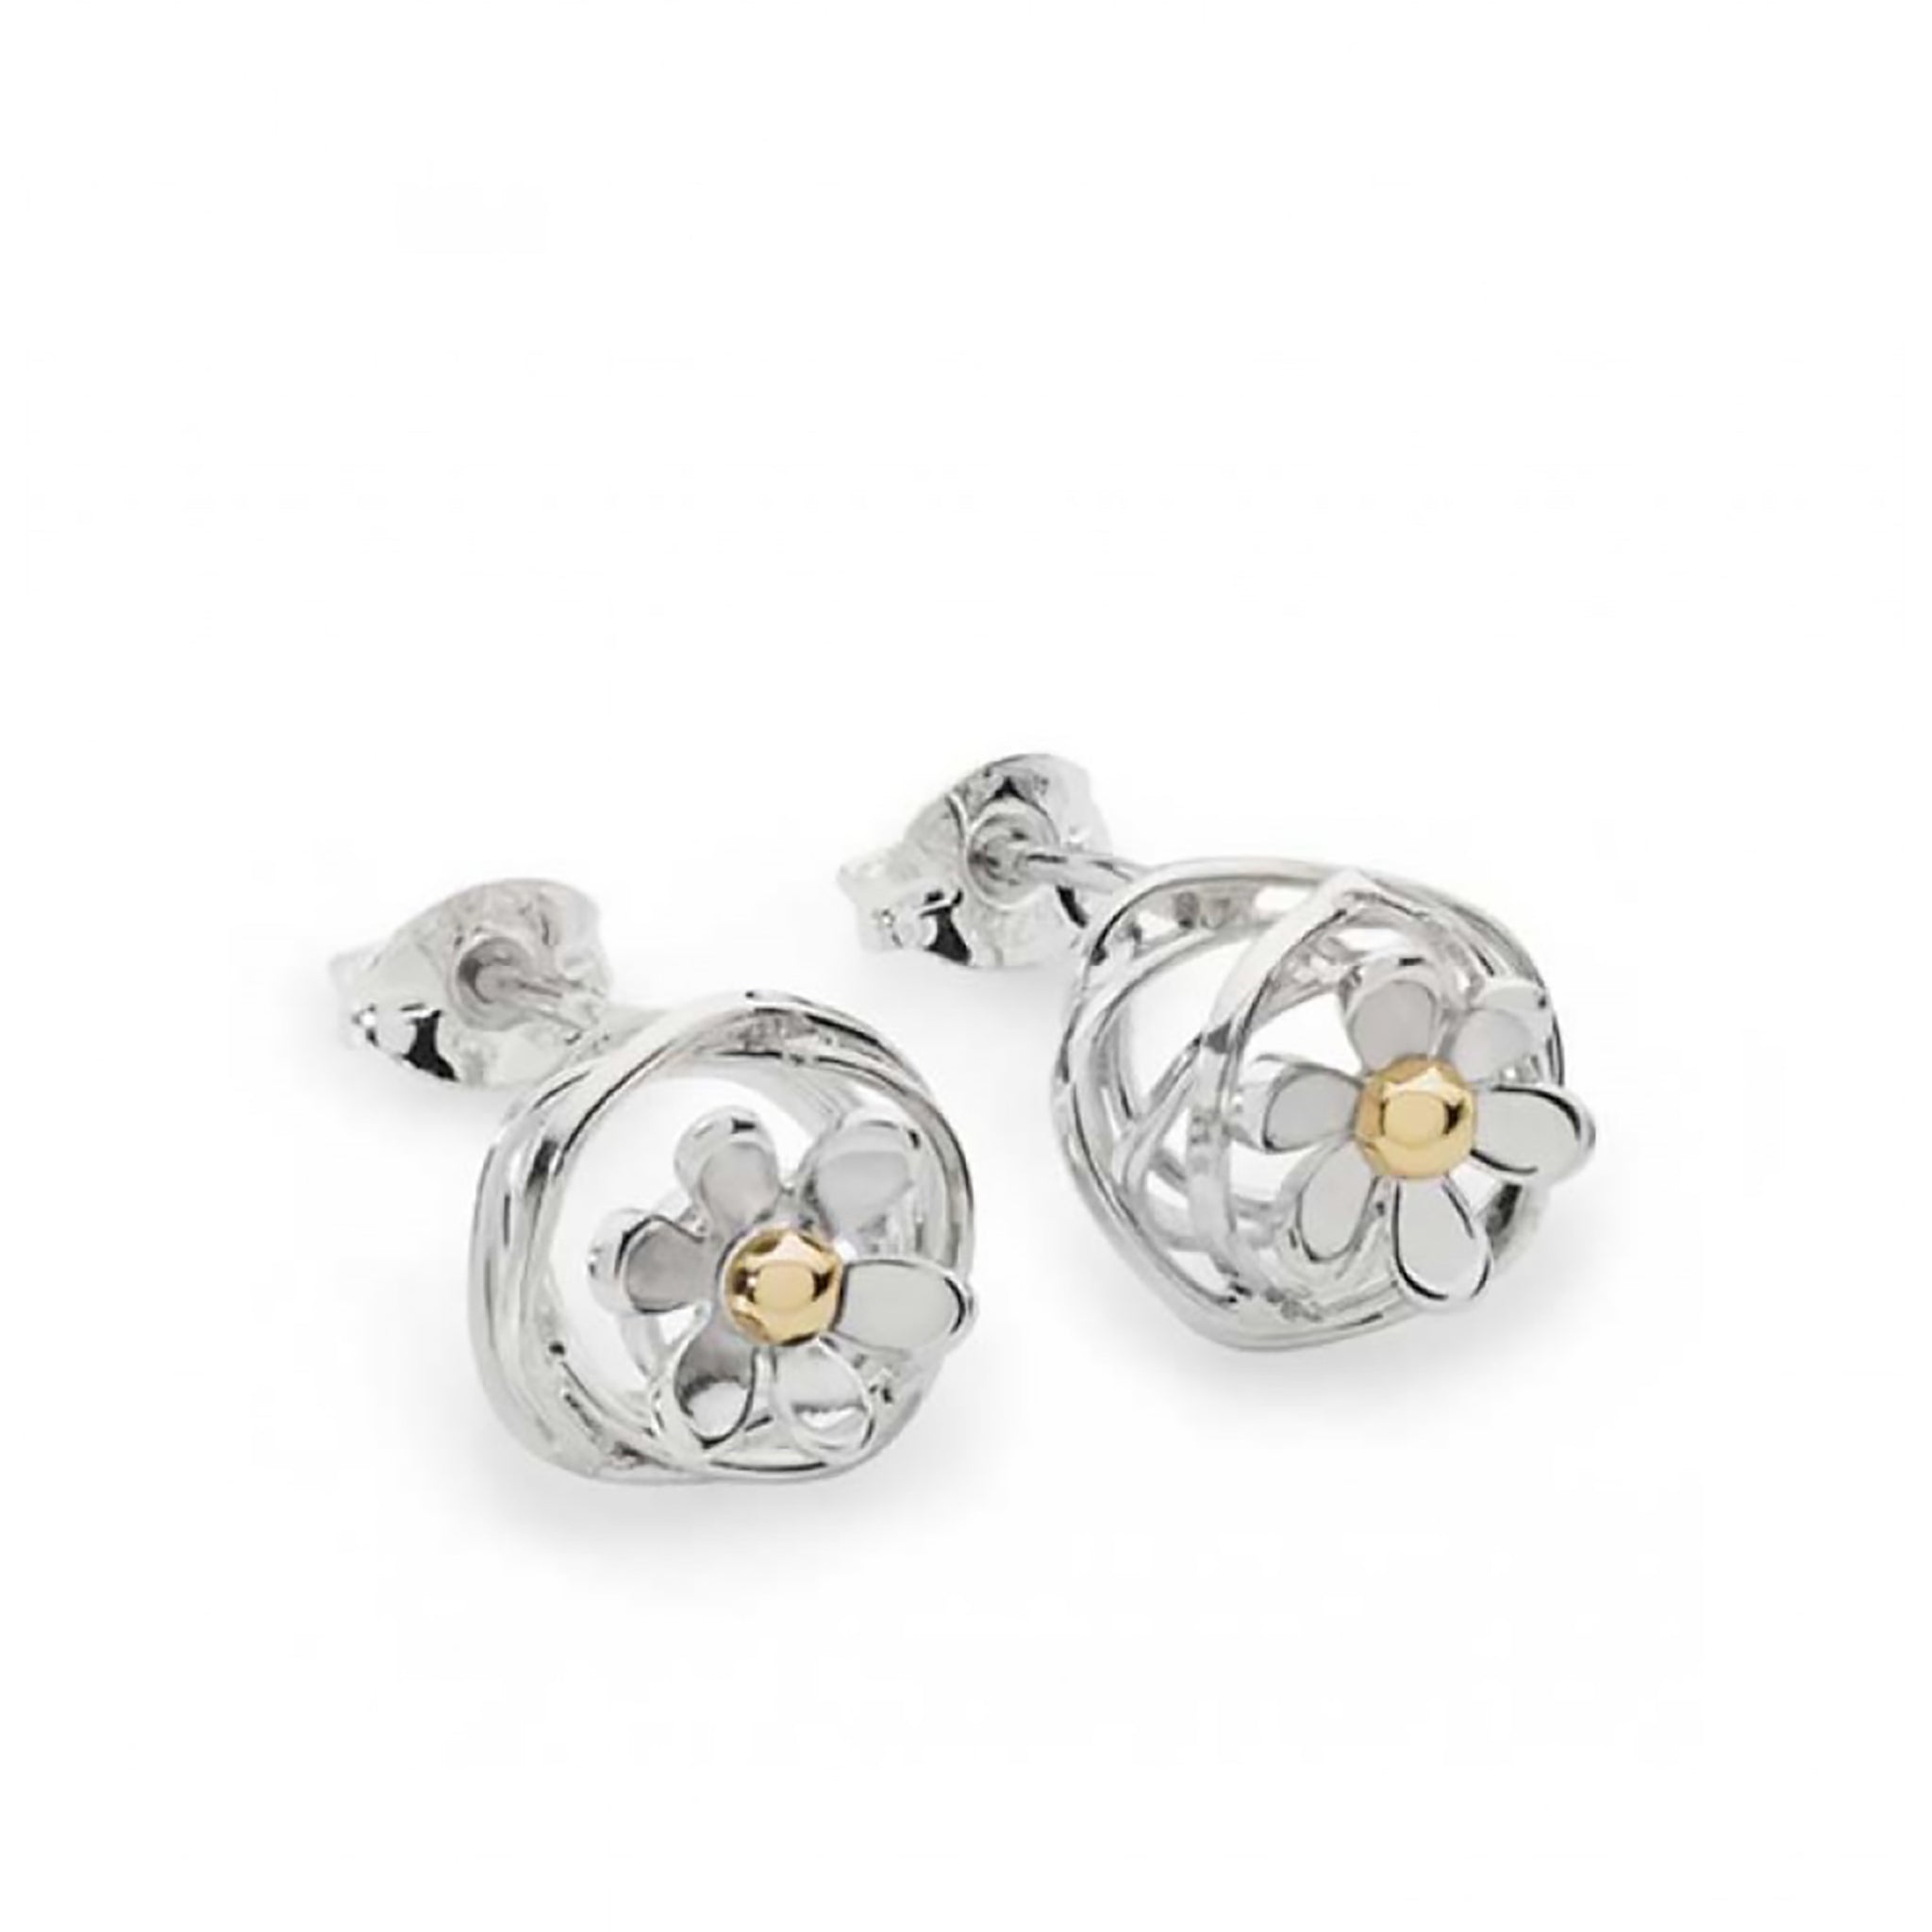 Pair of silver earrings with scribble silver tangle design and flower detail with gold centre on stud fittings